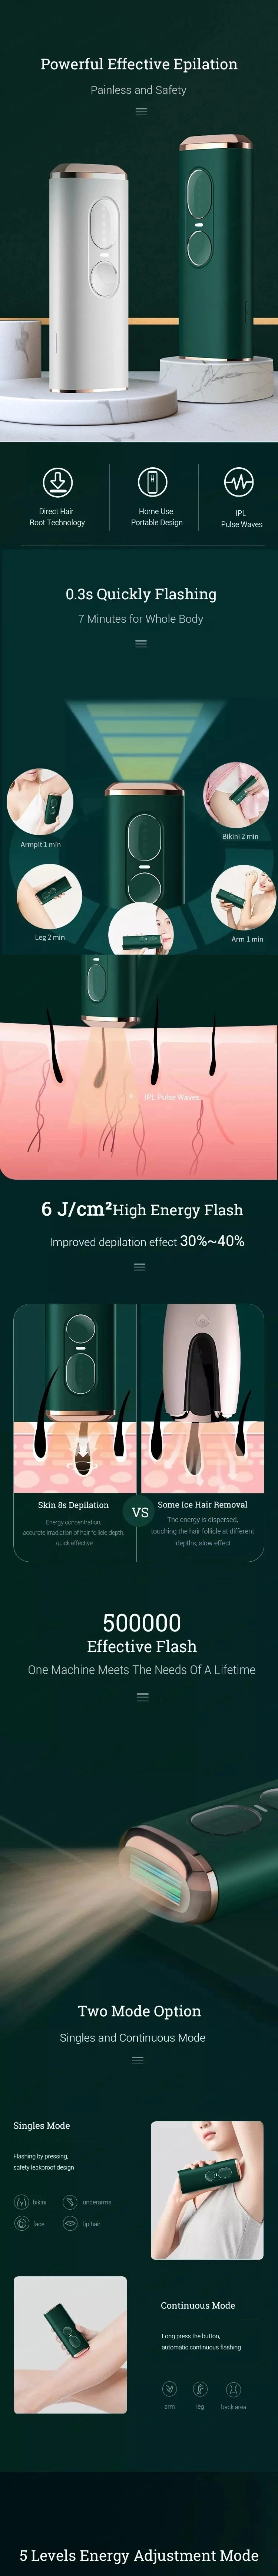 2020 New Arrival IPL Laser Hair Removal System Hair Removal Device More Than 15 Years Usage